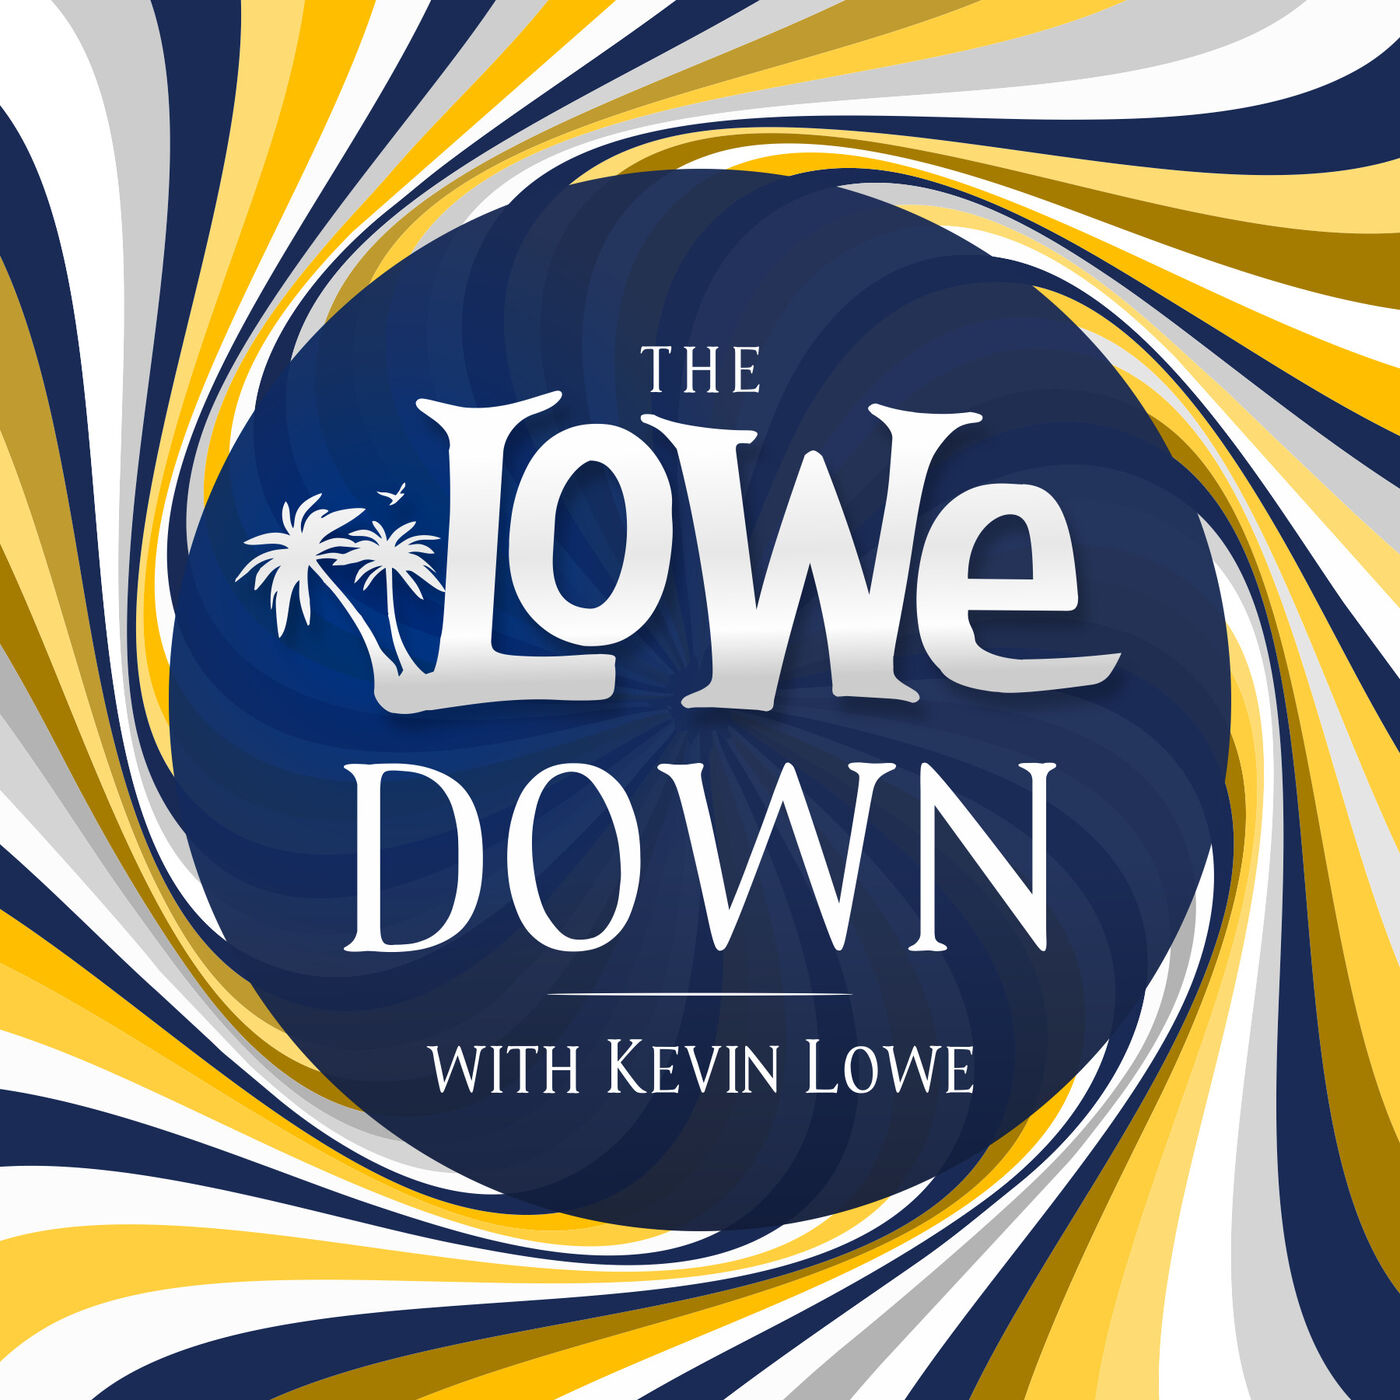 Artwork for podcast The Lowe Down with Kevin Lowe